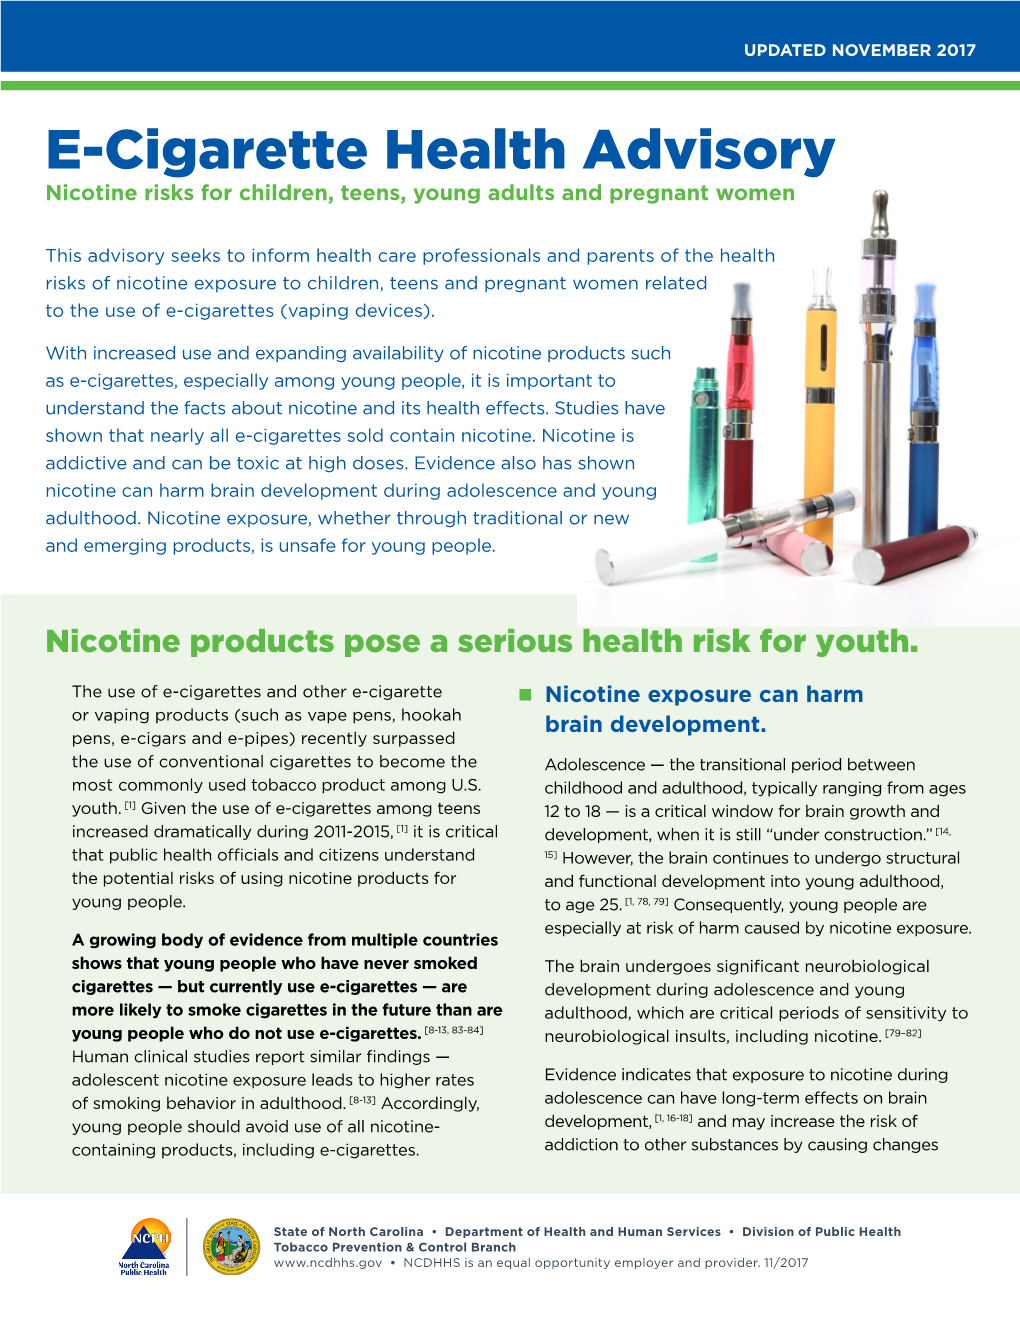 E-Cigarette Health Advisory Nicotine Risks for Children, Teens, Young Adults and Pregnant Women